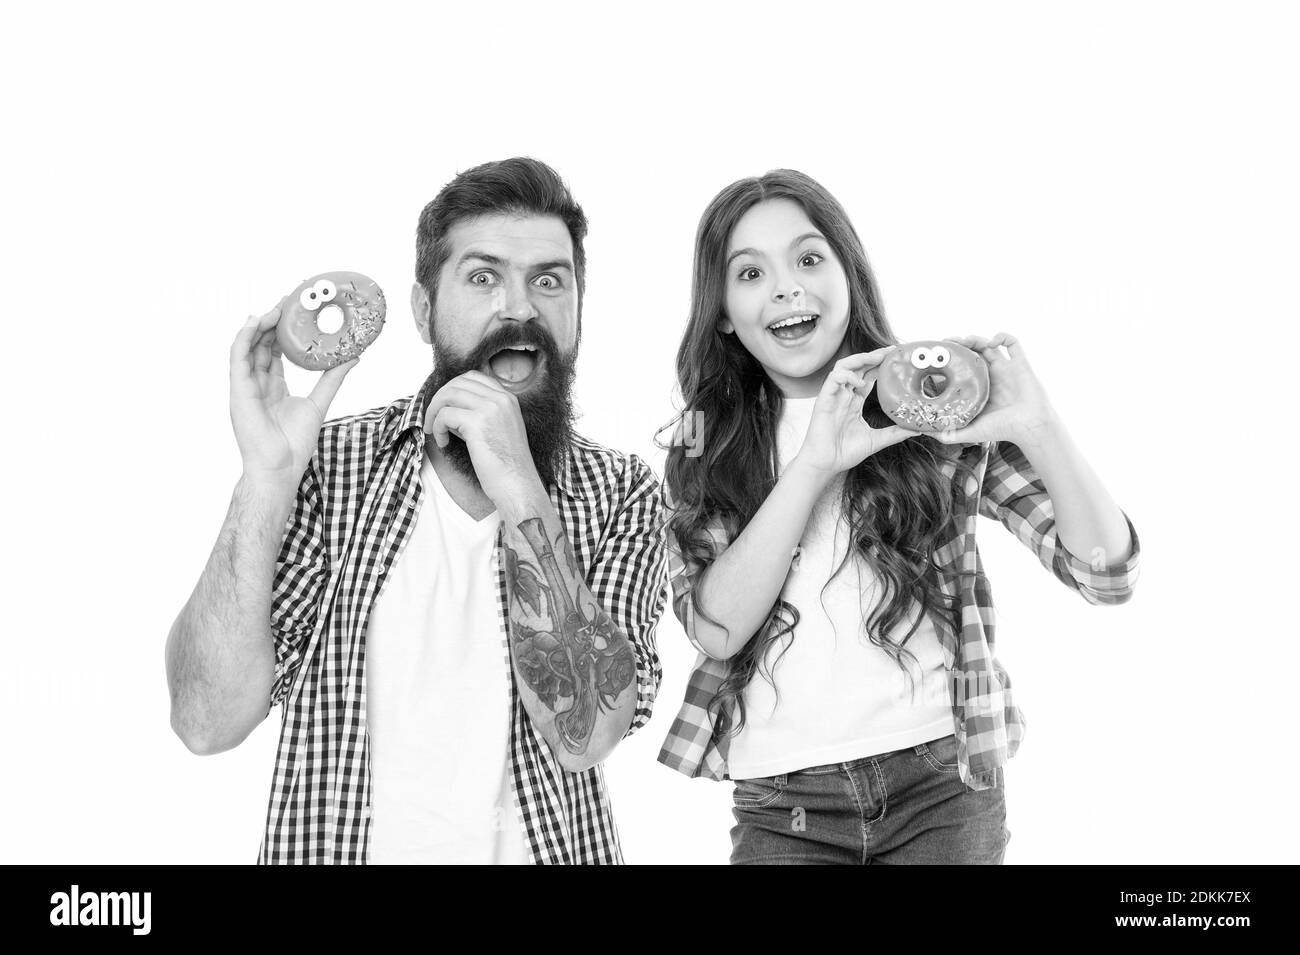 Bakery shop. Fathers day. Sweet tooth. Girl child and dad hold glazed donuts. Cheerful family. Sweets and treats concept. Daughter and father eat sweet donuts. Dessert. Happiness and joy. Sweet mood. Stock Photo